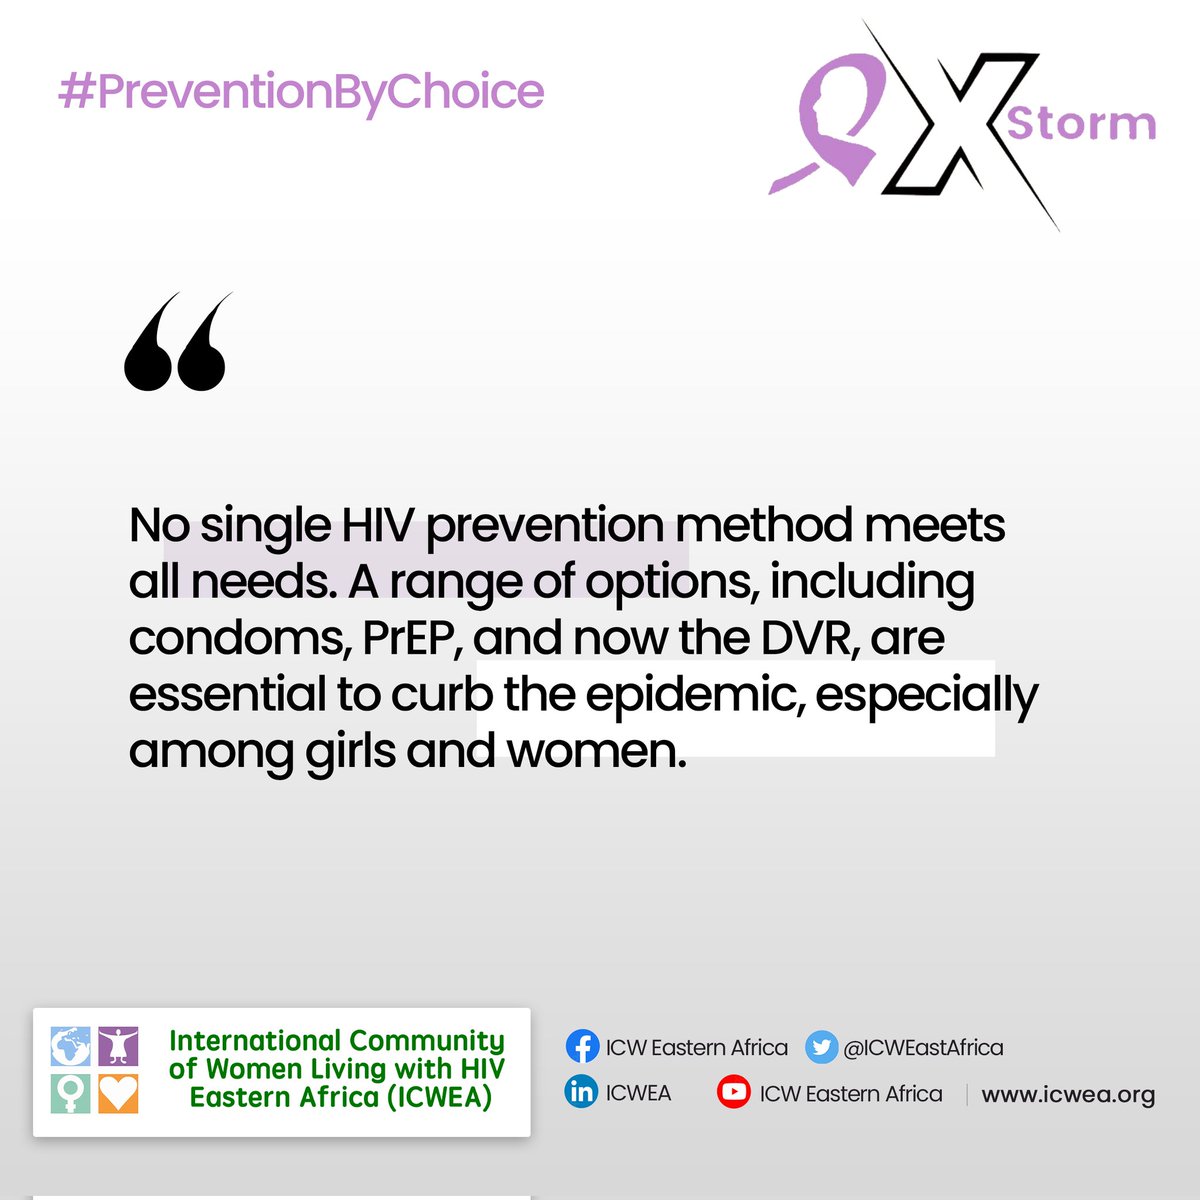 Follow the prescriptions told by the clinical person especially when it comes to HIV prevention 
@Aidsfonds
@ICWEastAfrica
@UNAIDS 
@GlobalFund 
@PEPFAR
@Jnkengasong
@aidscommission
@HIVpxresearch 
@unwomenuganda
#DVRForChoice
#OptionsForHer
#PreventionByChoice